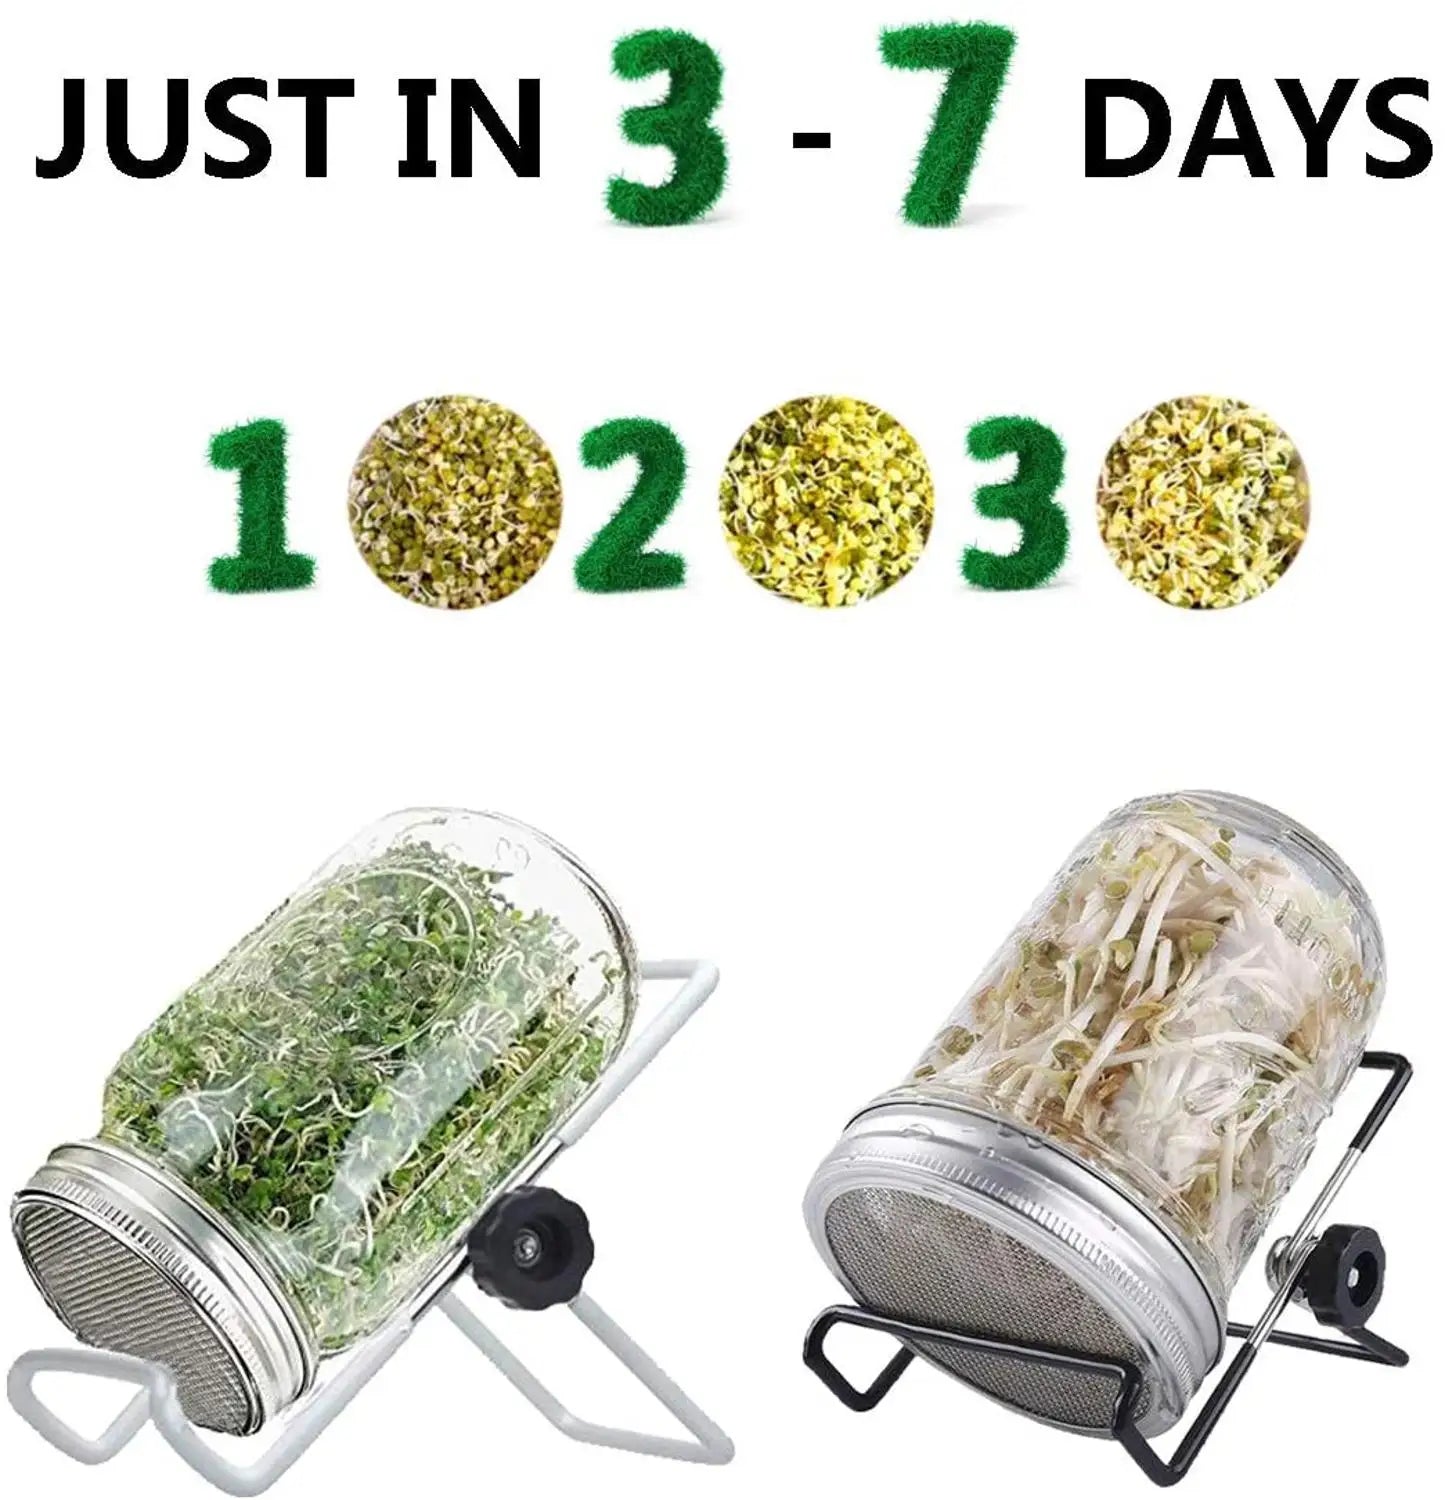 1Set Seed Sprouter Germination Cover Kit Sprouting Mason Jars with Stainless Steel Strainer Lids Stainless Steel Germinator Stan